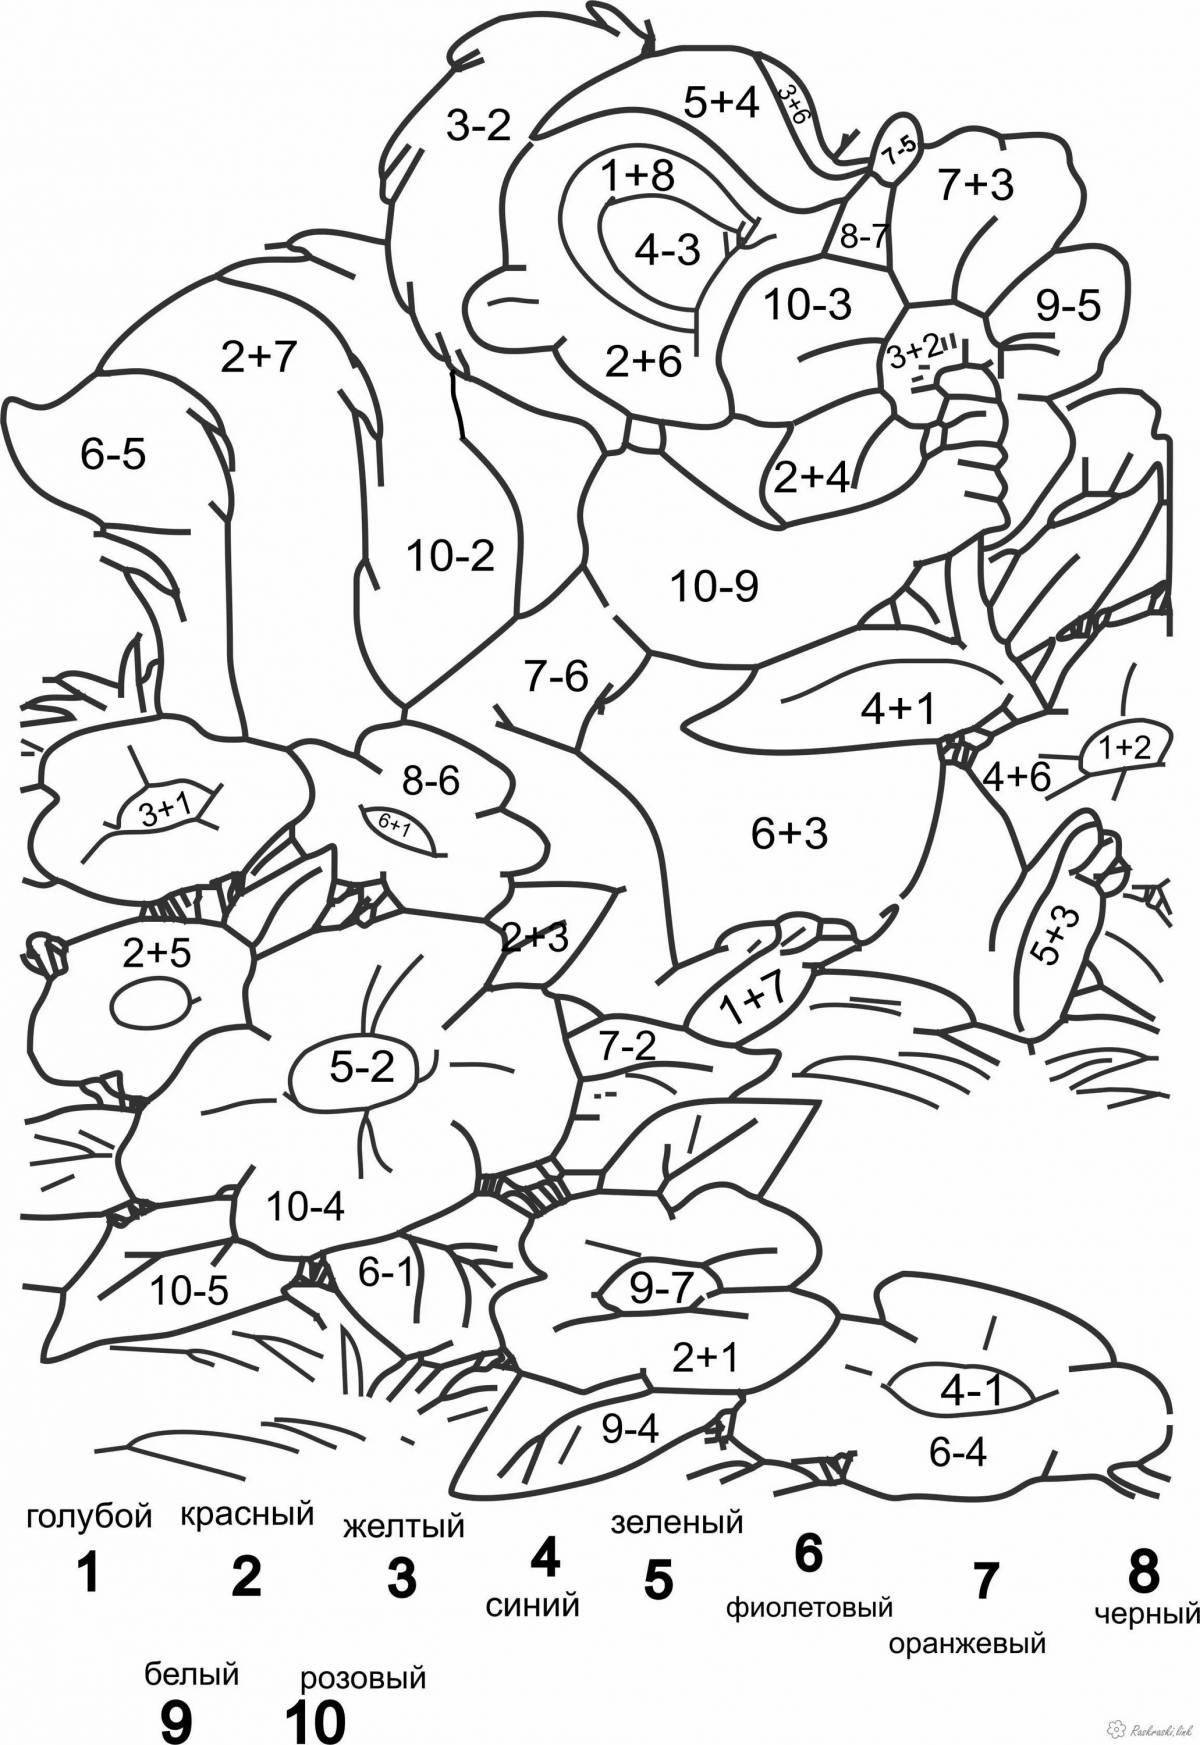 Adorable math coloring book for 6-7 year olds